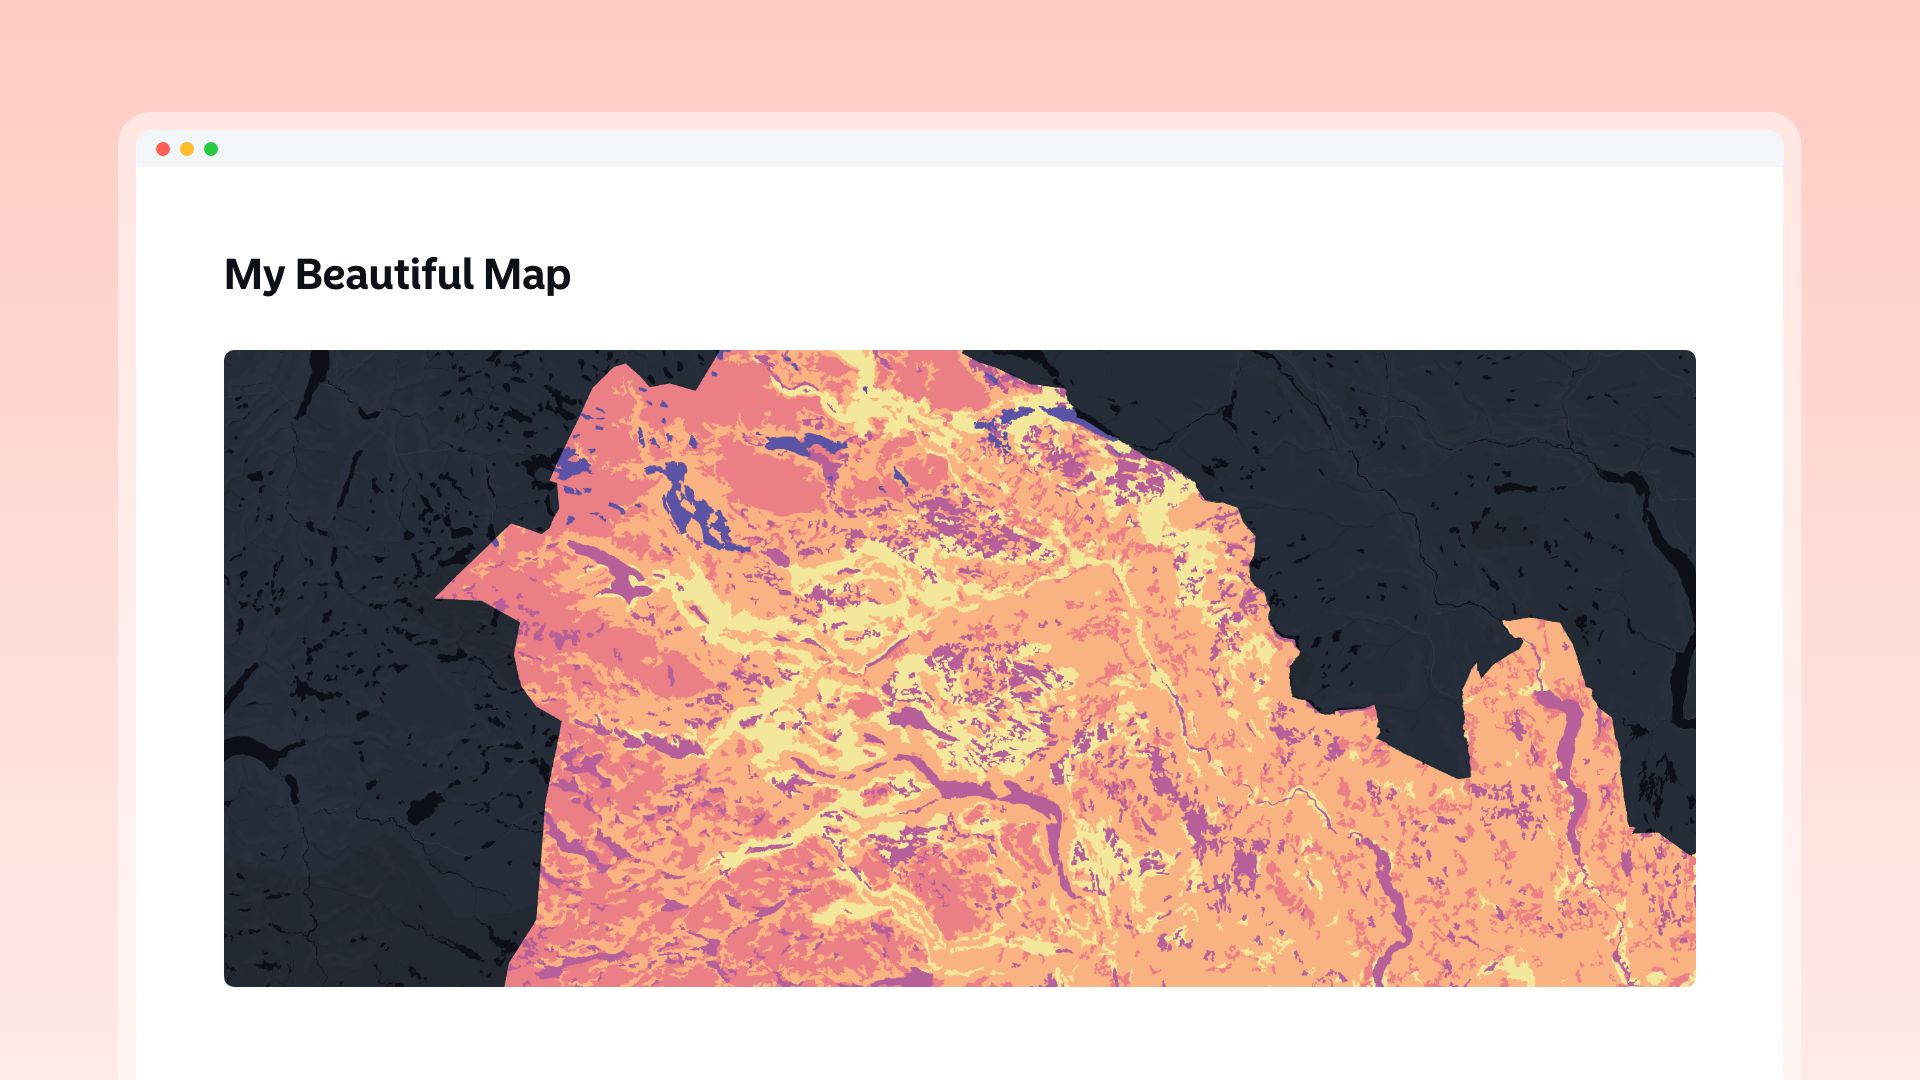 Embed Your Maps